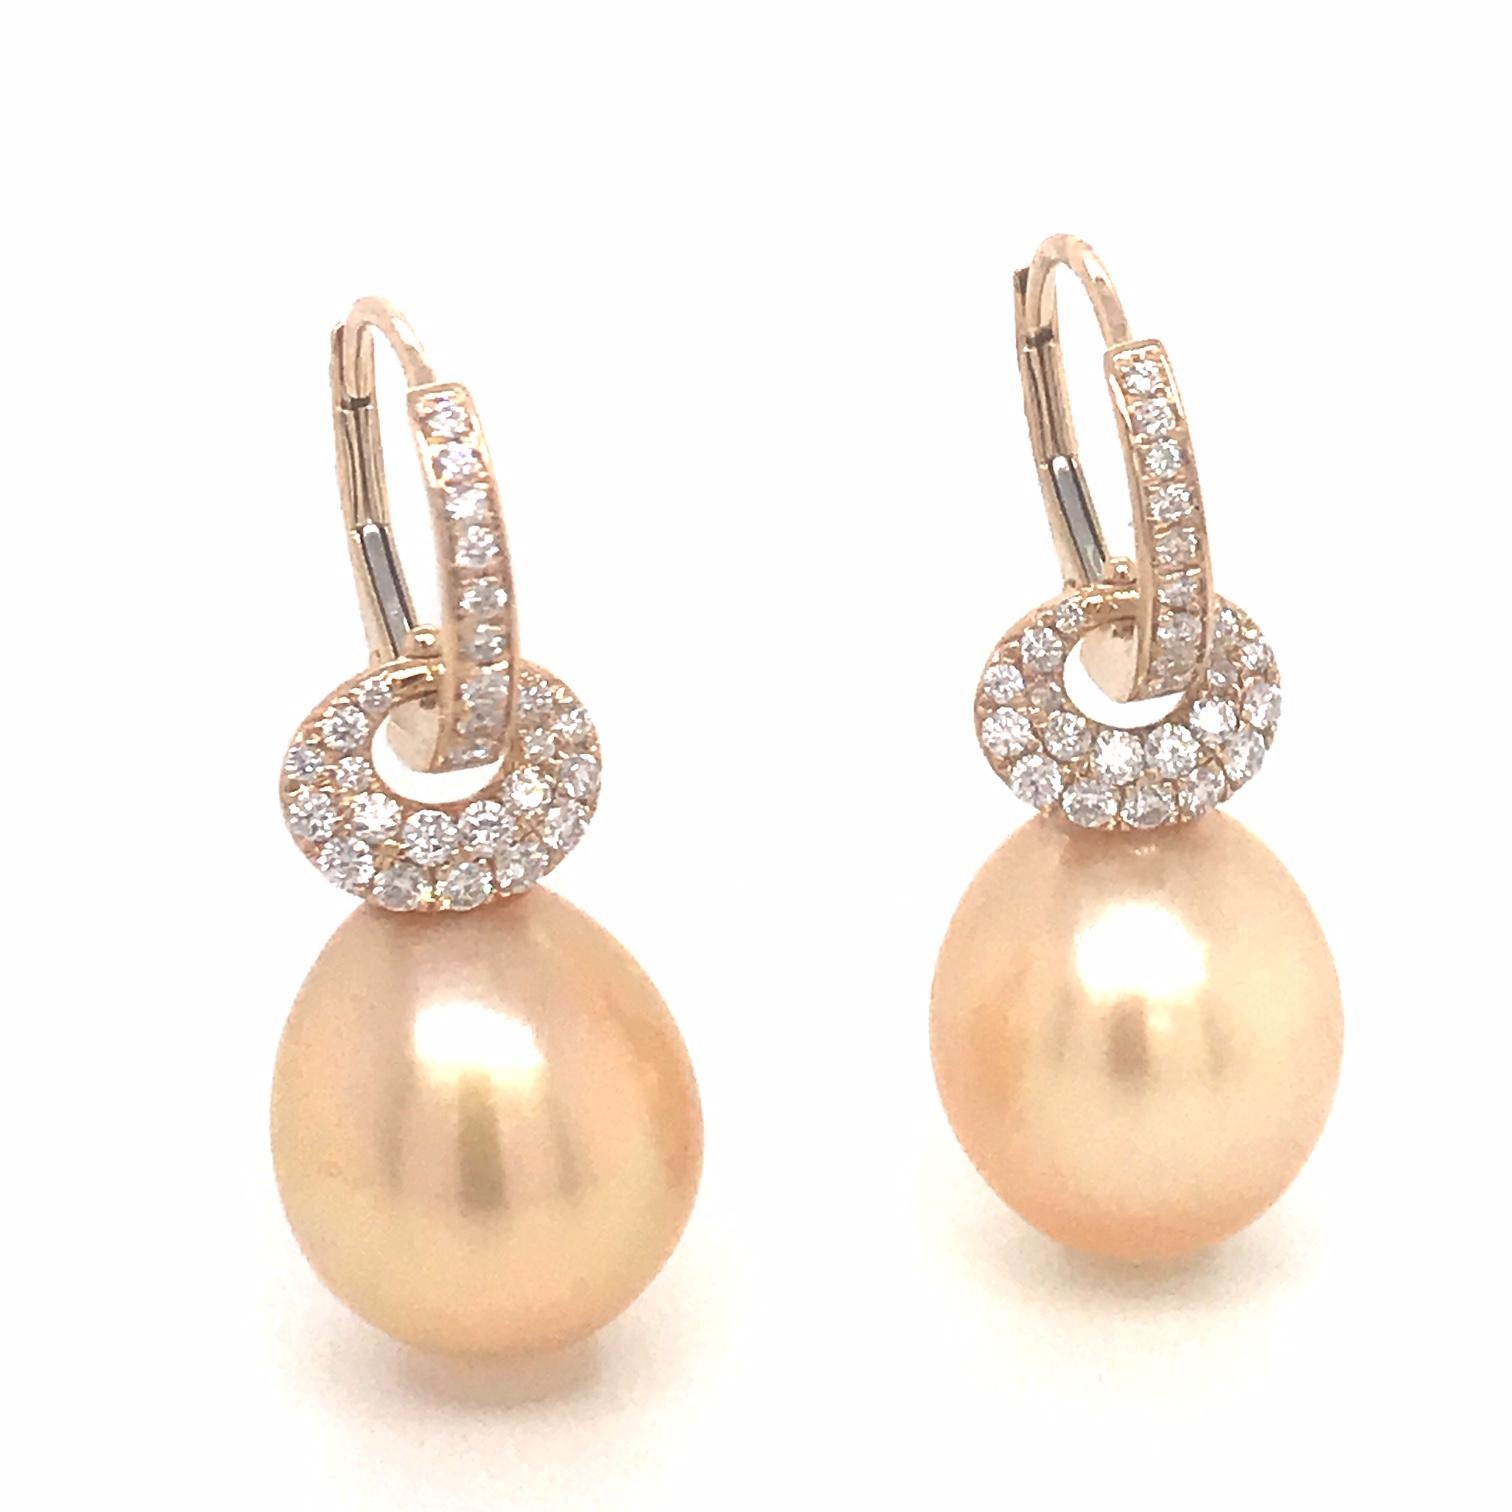 18K Yellow gold drop earrings featuring two Golden South Sea Pearls measuring 12-13 mm with 56 round brilliants 0.57 carats.
Color G-H
Clarity SI

Pearls can be changed to Tahitian, Pink or White Pearls upon request. 

Diamond Height: 11/16